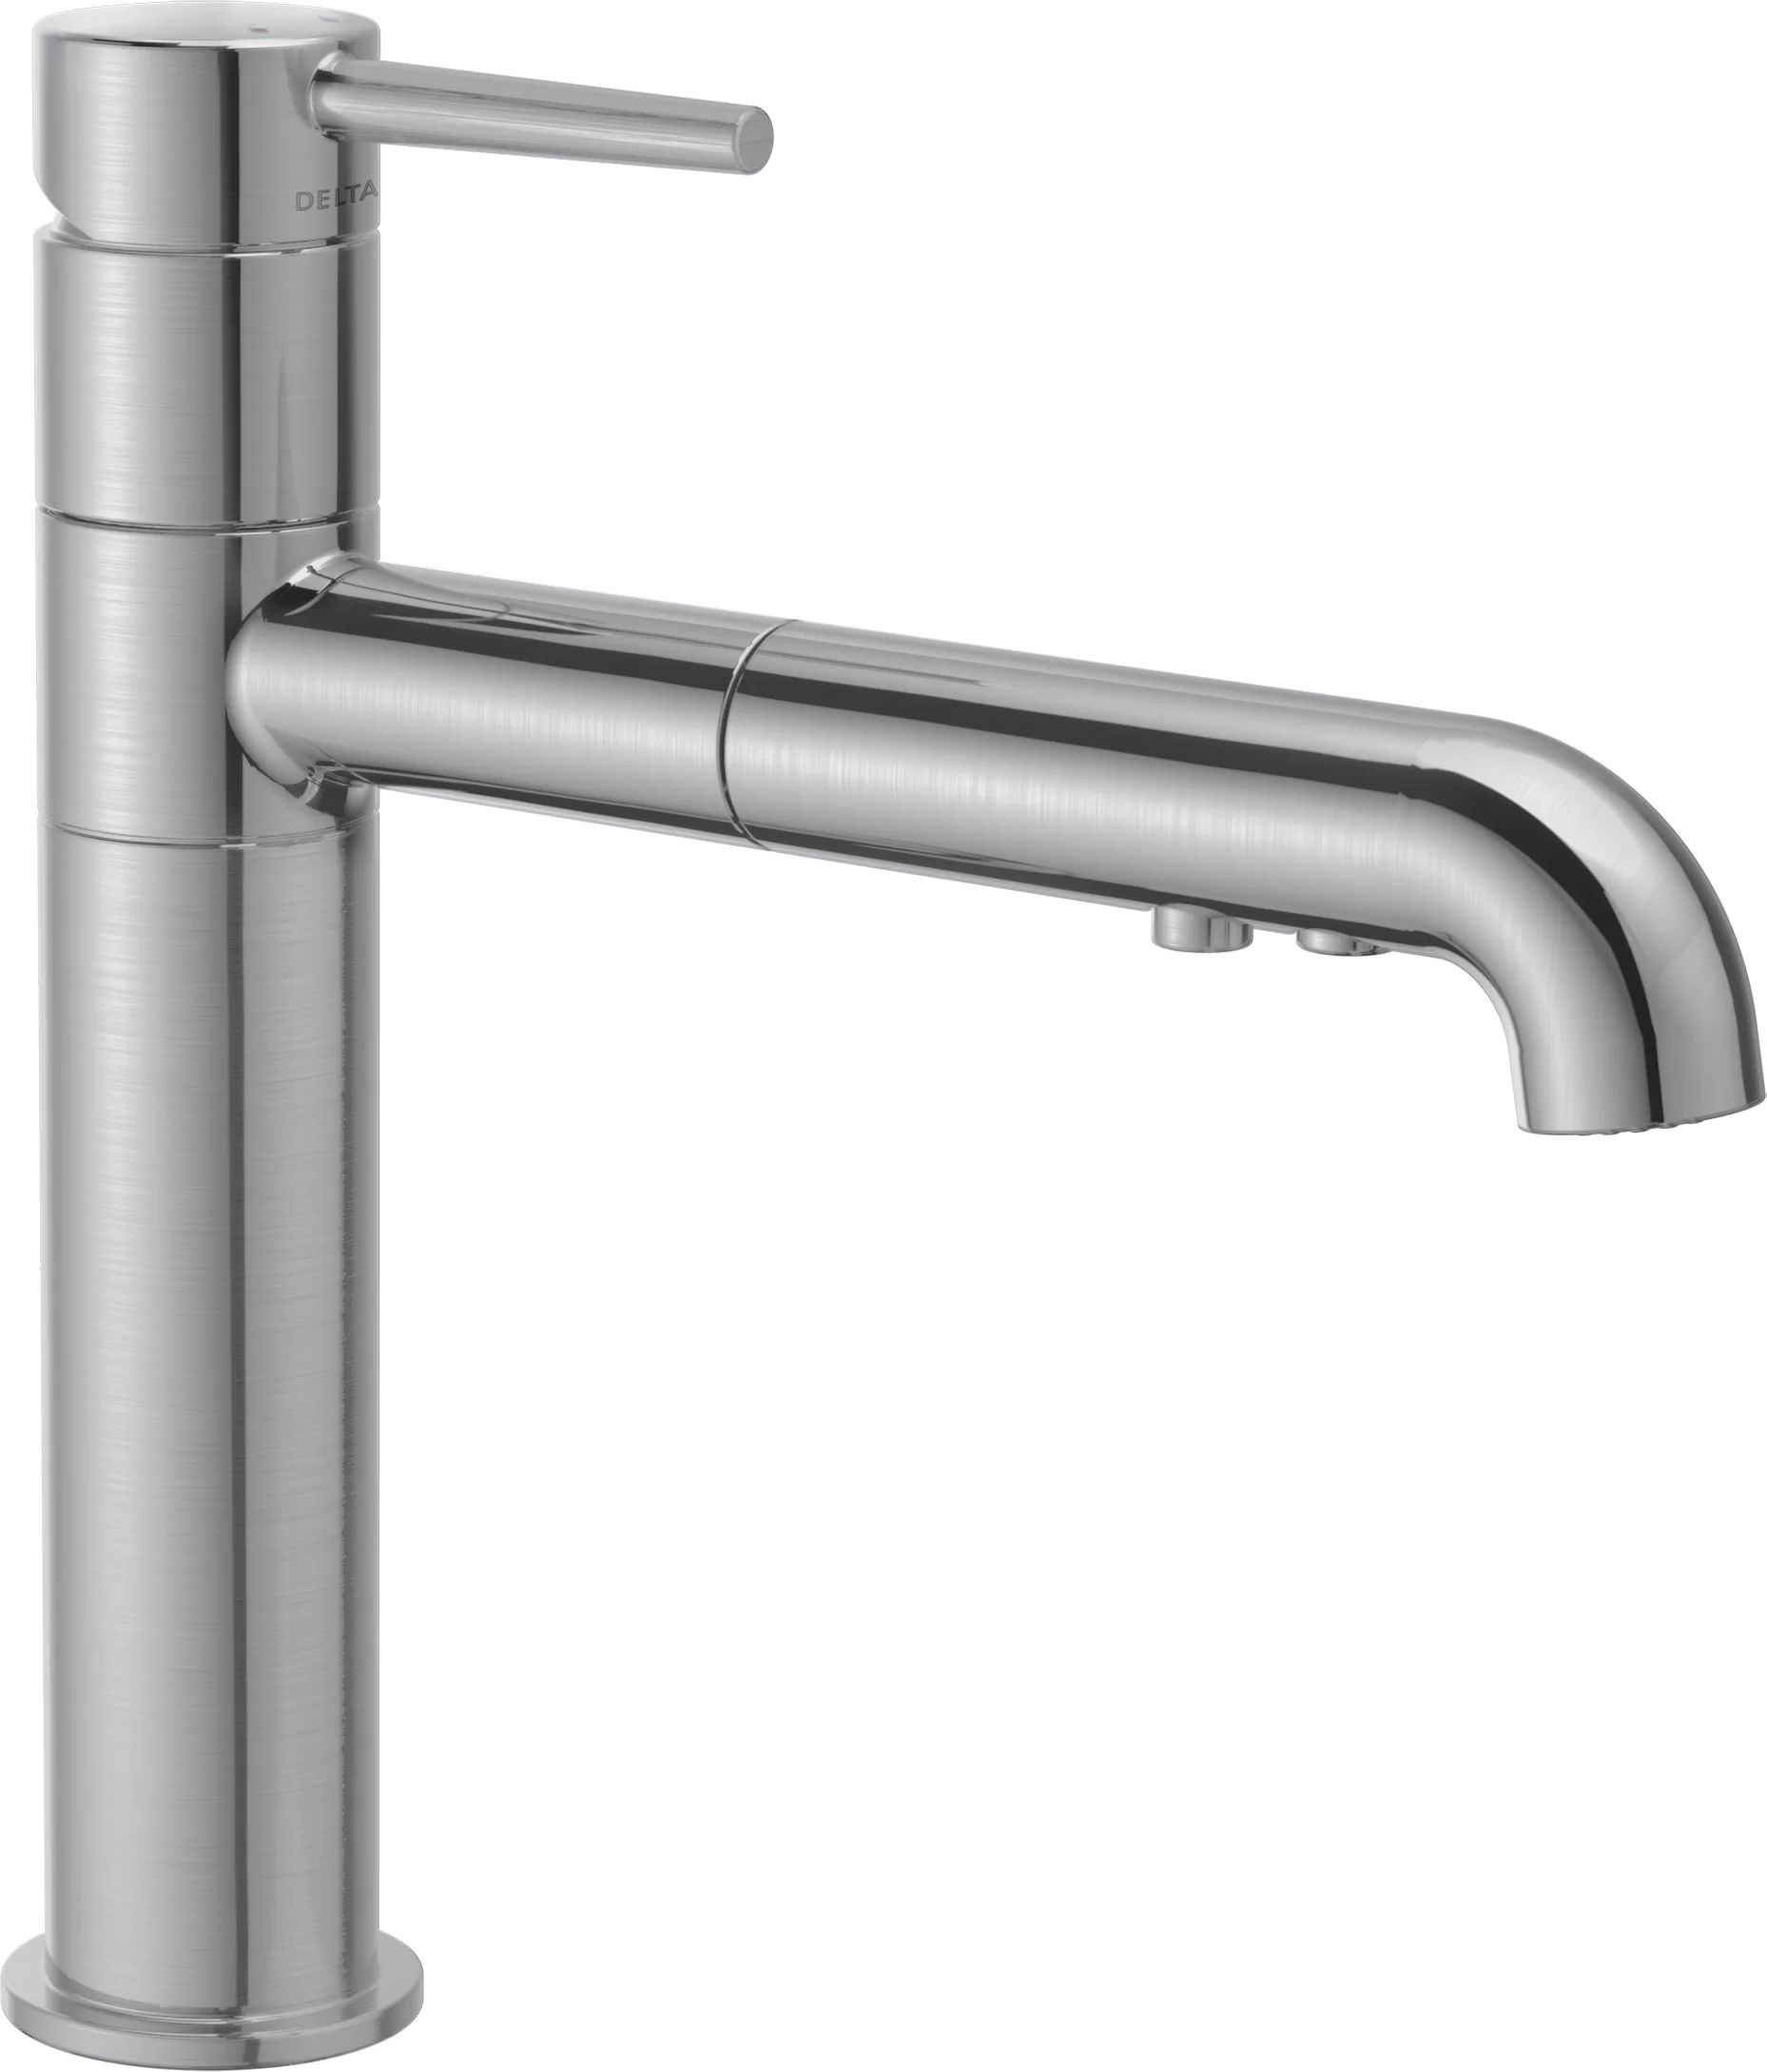 Trinsic Standard Pull Out Single Handle Kitchen Faucet with Diamond Seal Technology | Wayfair North America